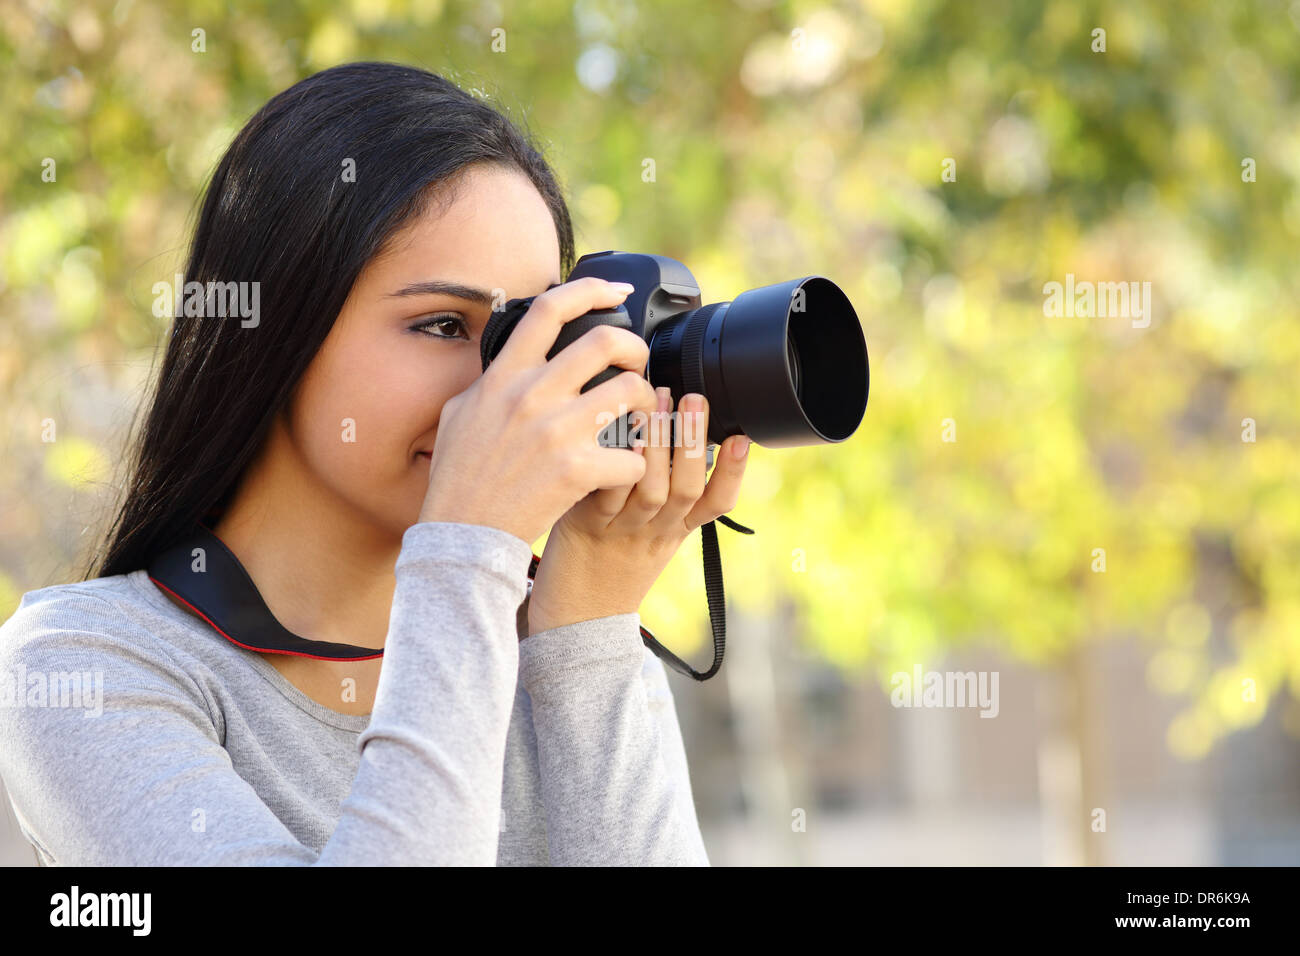 Photograph woman learning photography in a park happy with a green unfocused background Stock Photo